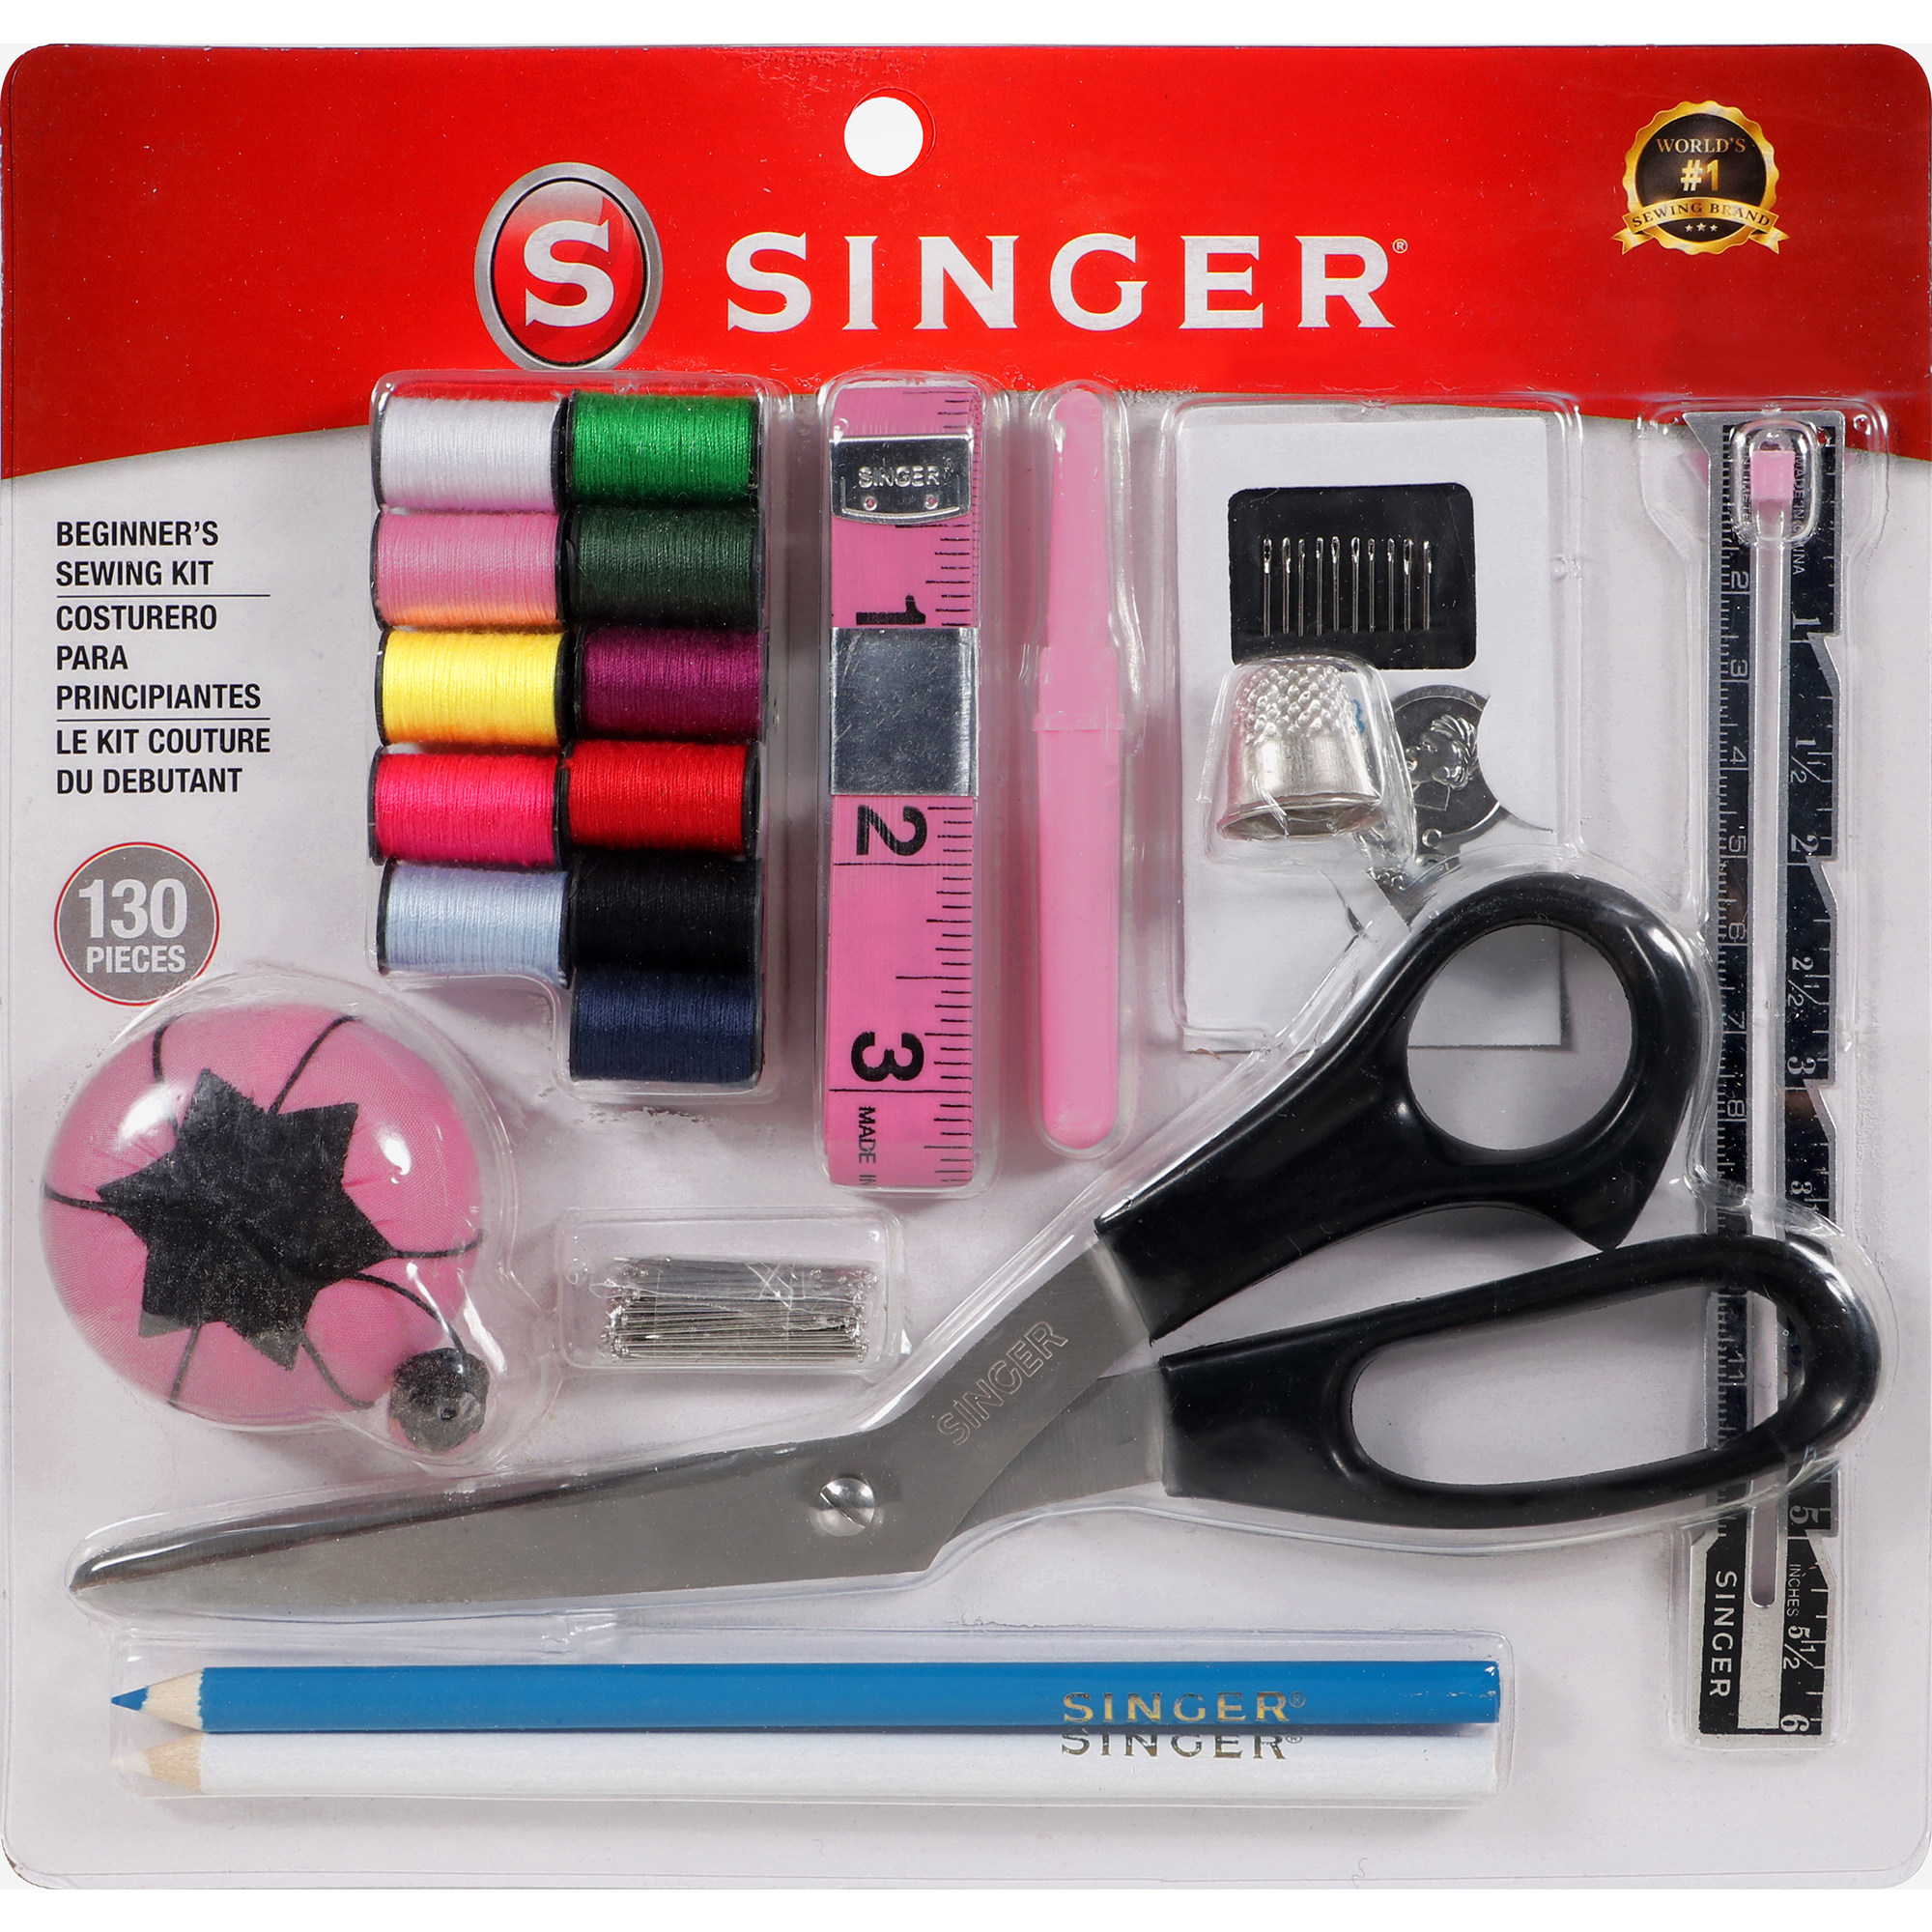 Singer Beginners Sewing Kit, 130 pieces - image 1 of 17